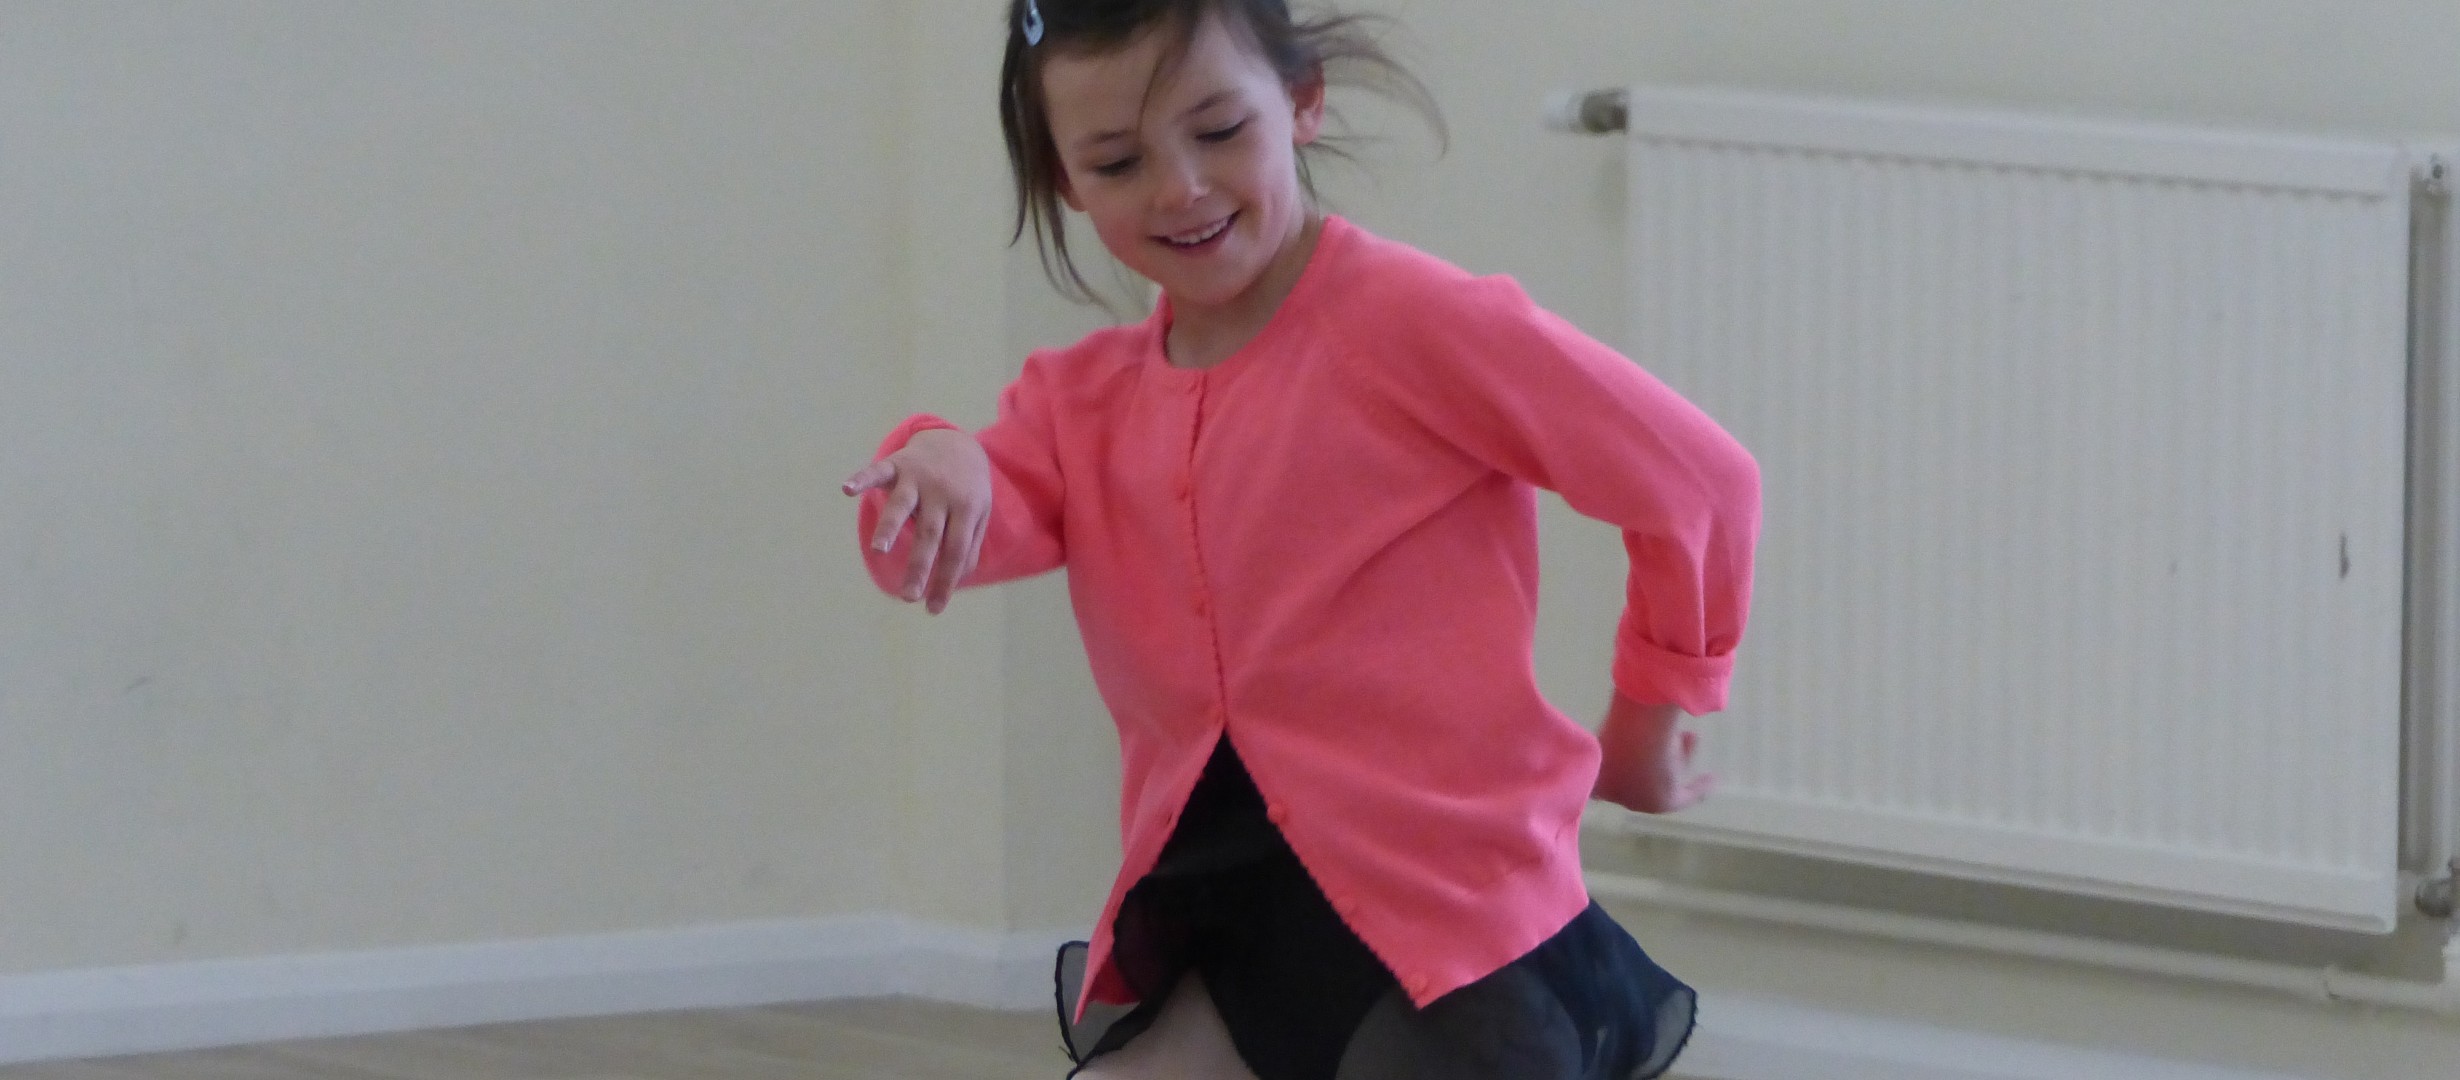 A female dancer aged about 8 years old with brown hair tied back smiling whilst jumping to the side. Wearing a pink cardigan and black ballet skirt.